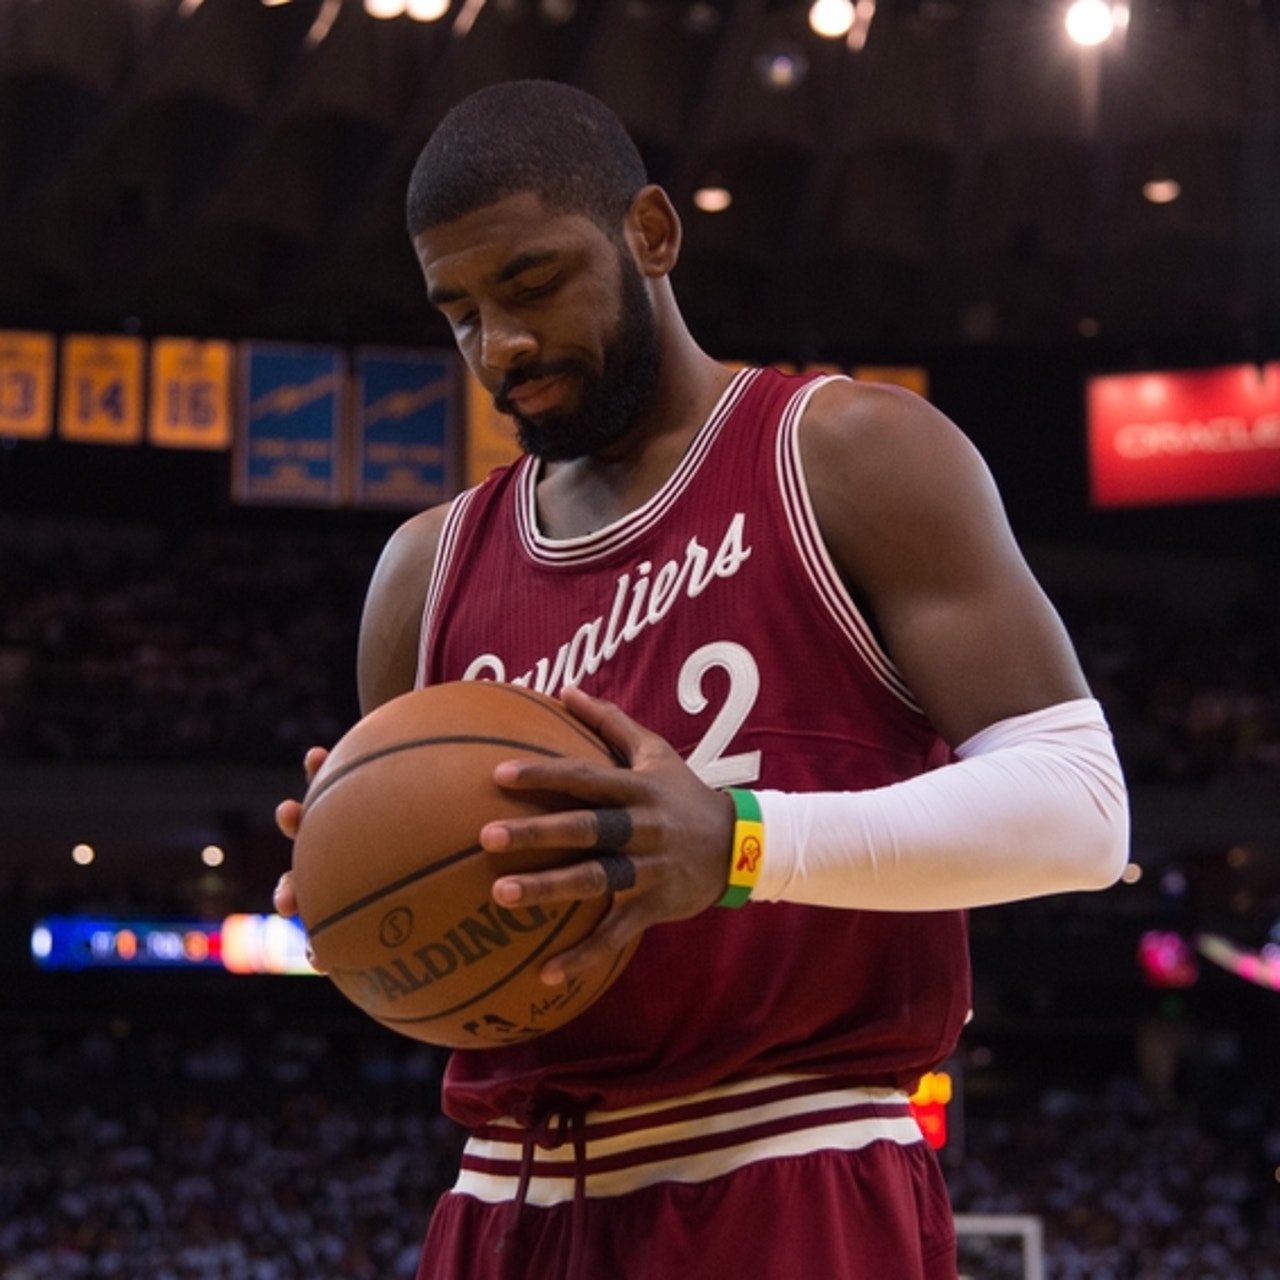 The Cavs' new jersey promo lives in a world where everything's cool with  Kyrie Irving 